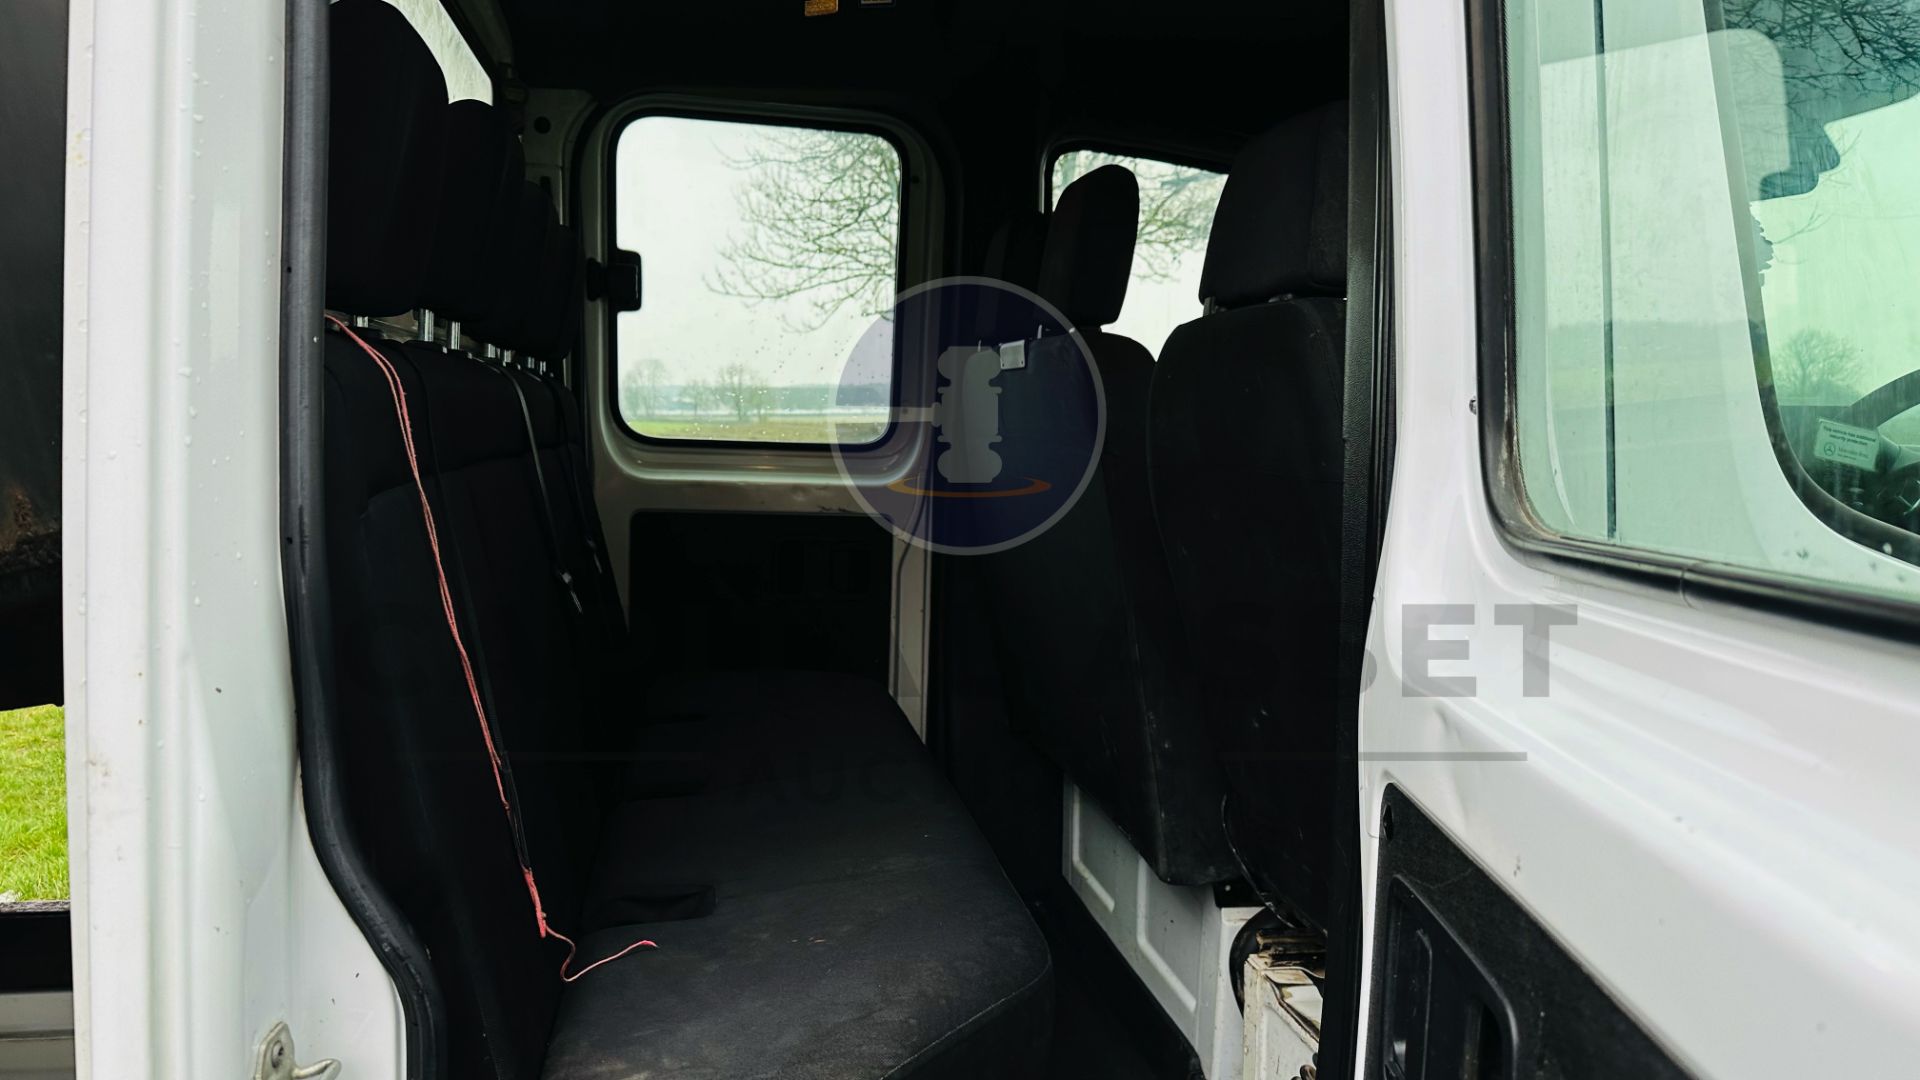 (On Sale) MERCEDES-BENZ SPRINTER 314 CDI *LWB - 7 SEATER D/CAB TIPPER* (2019 - NEW MODEL) *EURO 6* - Image 24 of 38